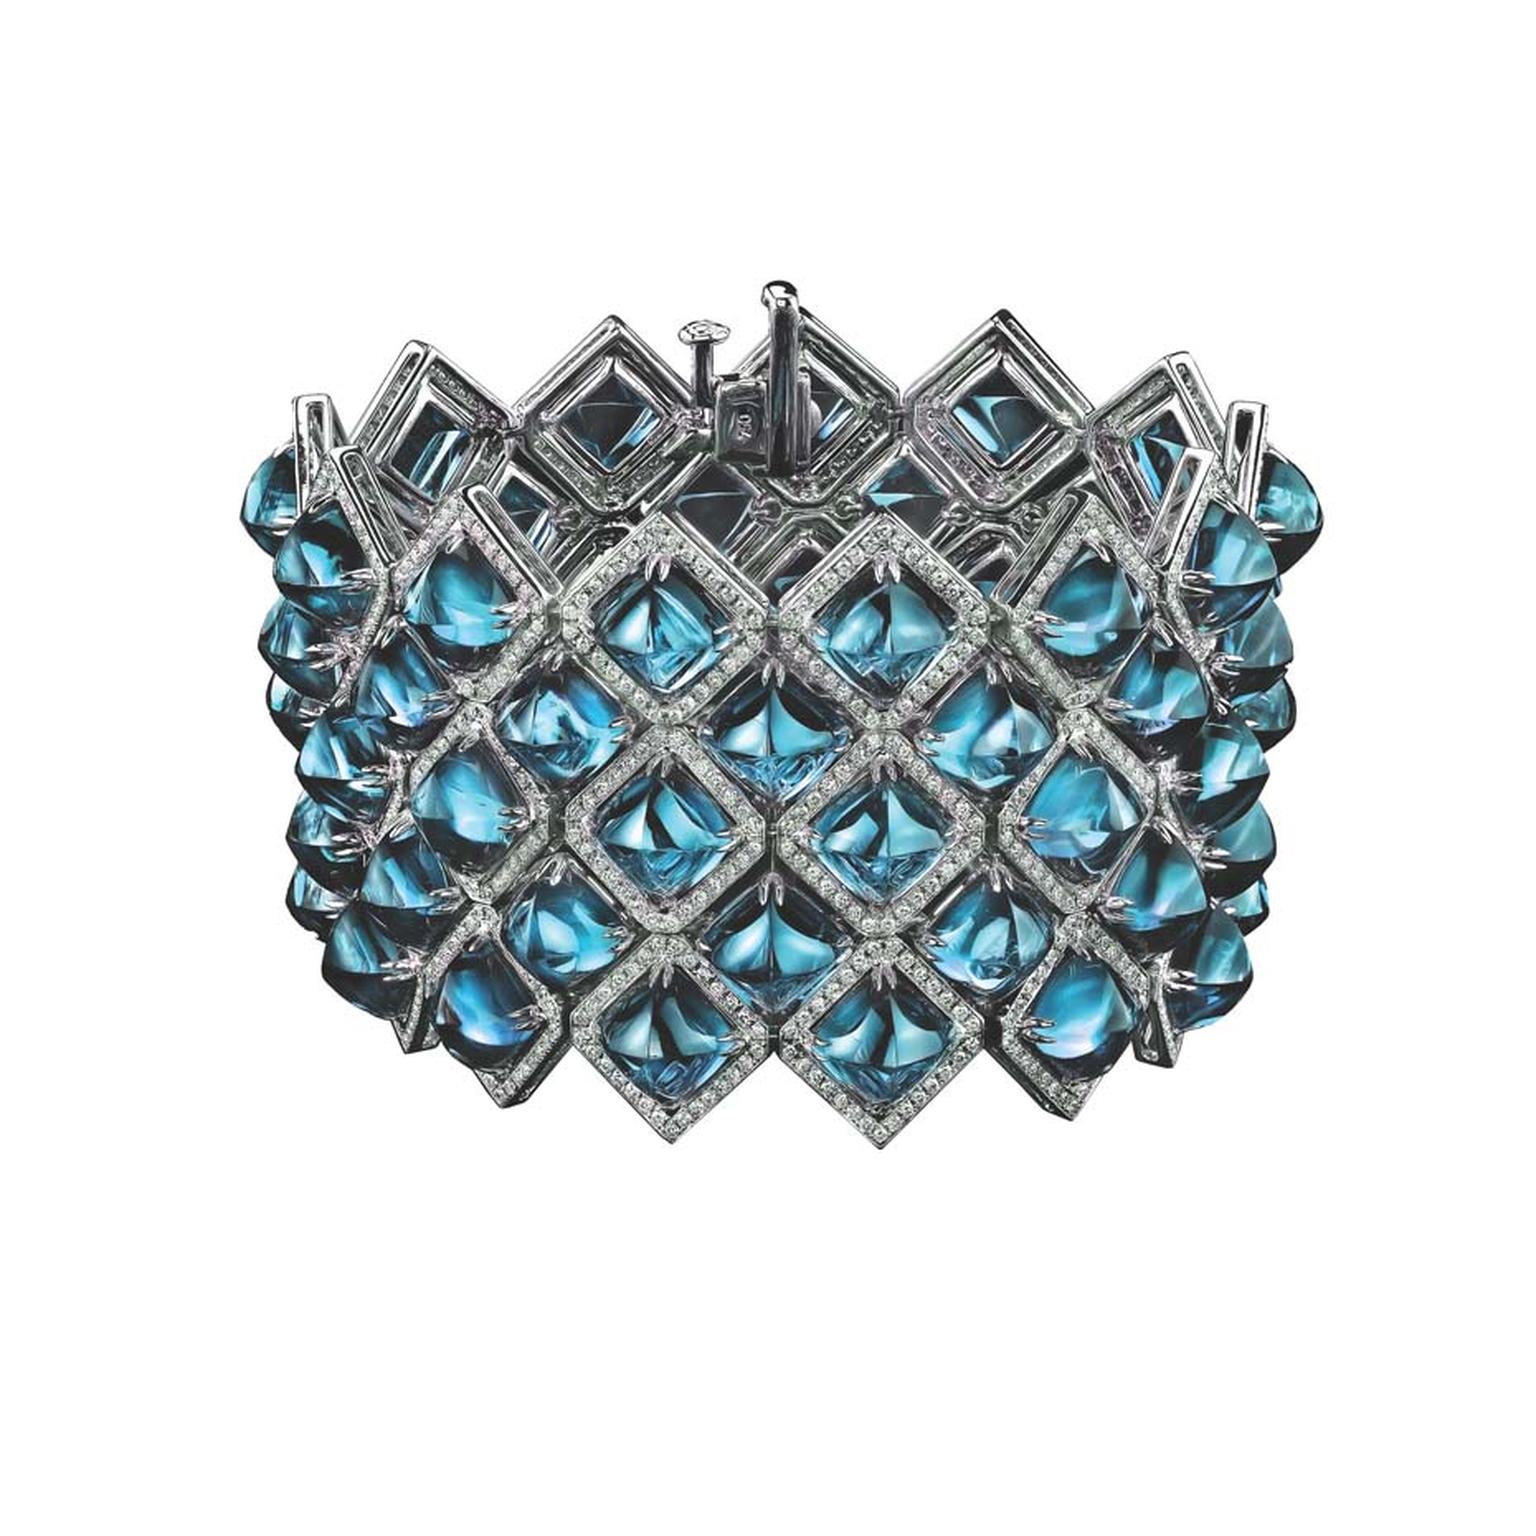 Robert Procop cuff in white gold, from the Legacy Brooke collection, with blue topaz and diamonds.